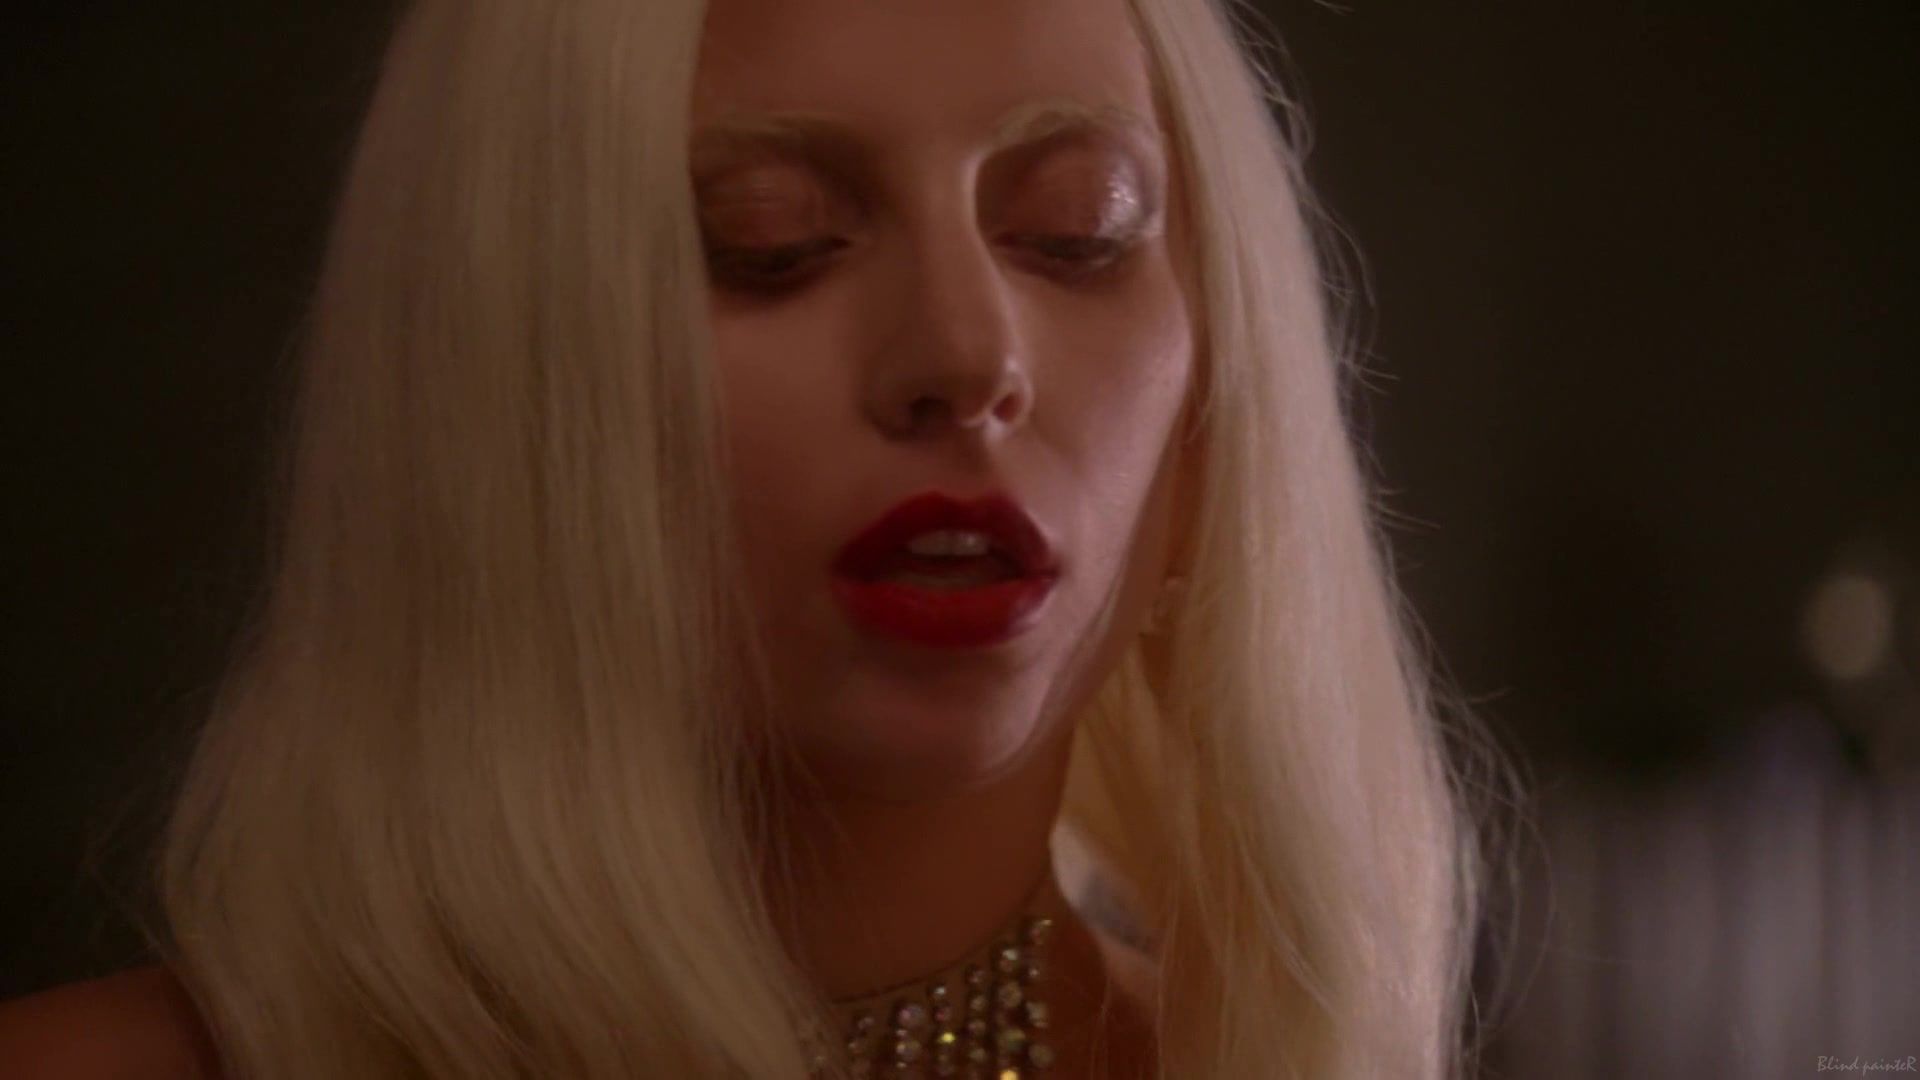 Amateur Sex video Lady Gaga & Chasty Ballesteros nude - American Horror Story S05E01 (2015) Peruana